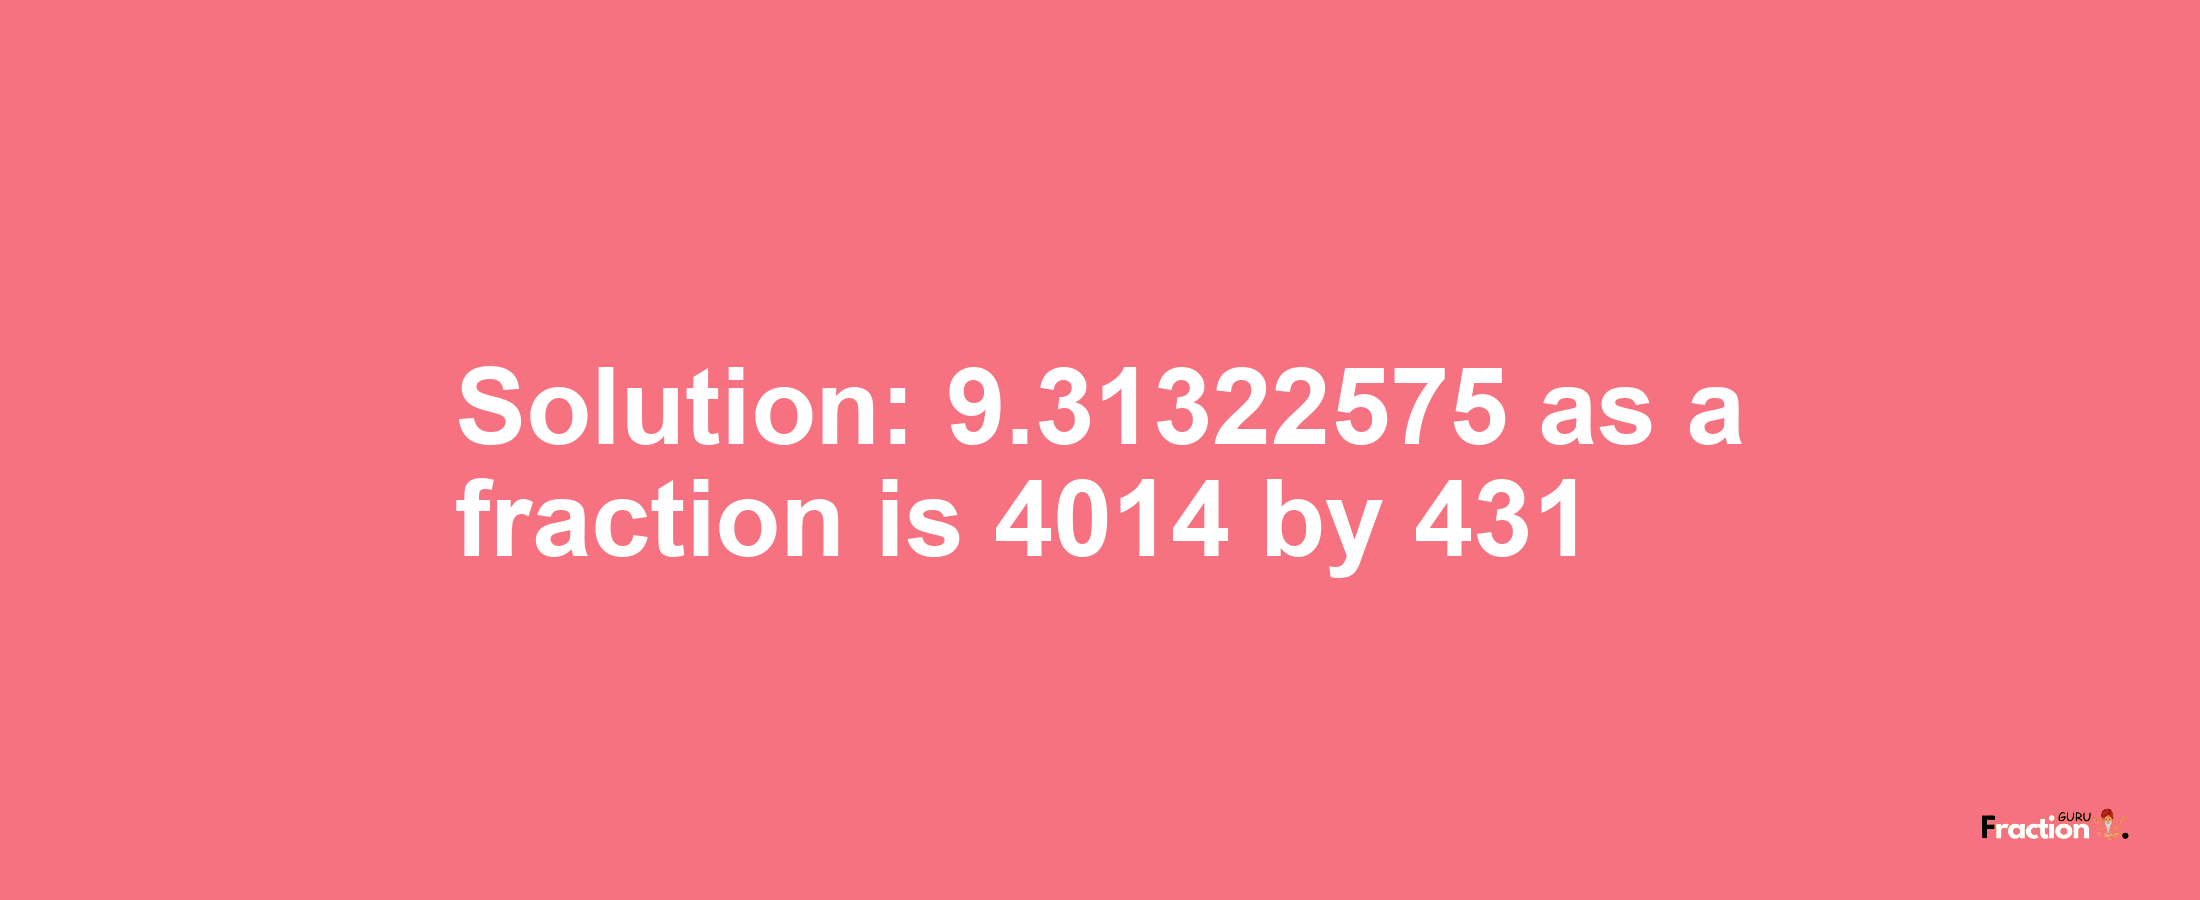 Solution:9.31322575 as a fraction is 4014/431